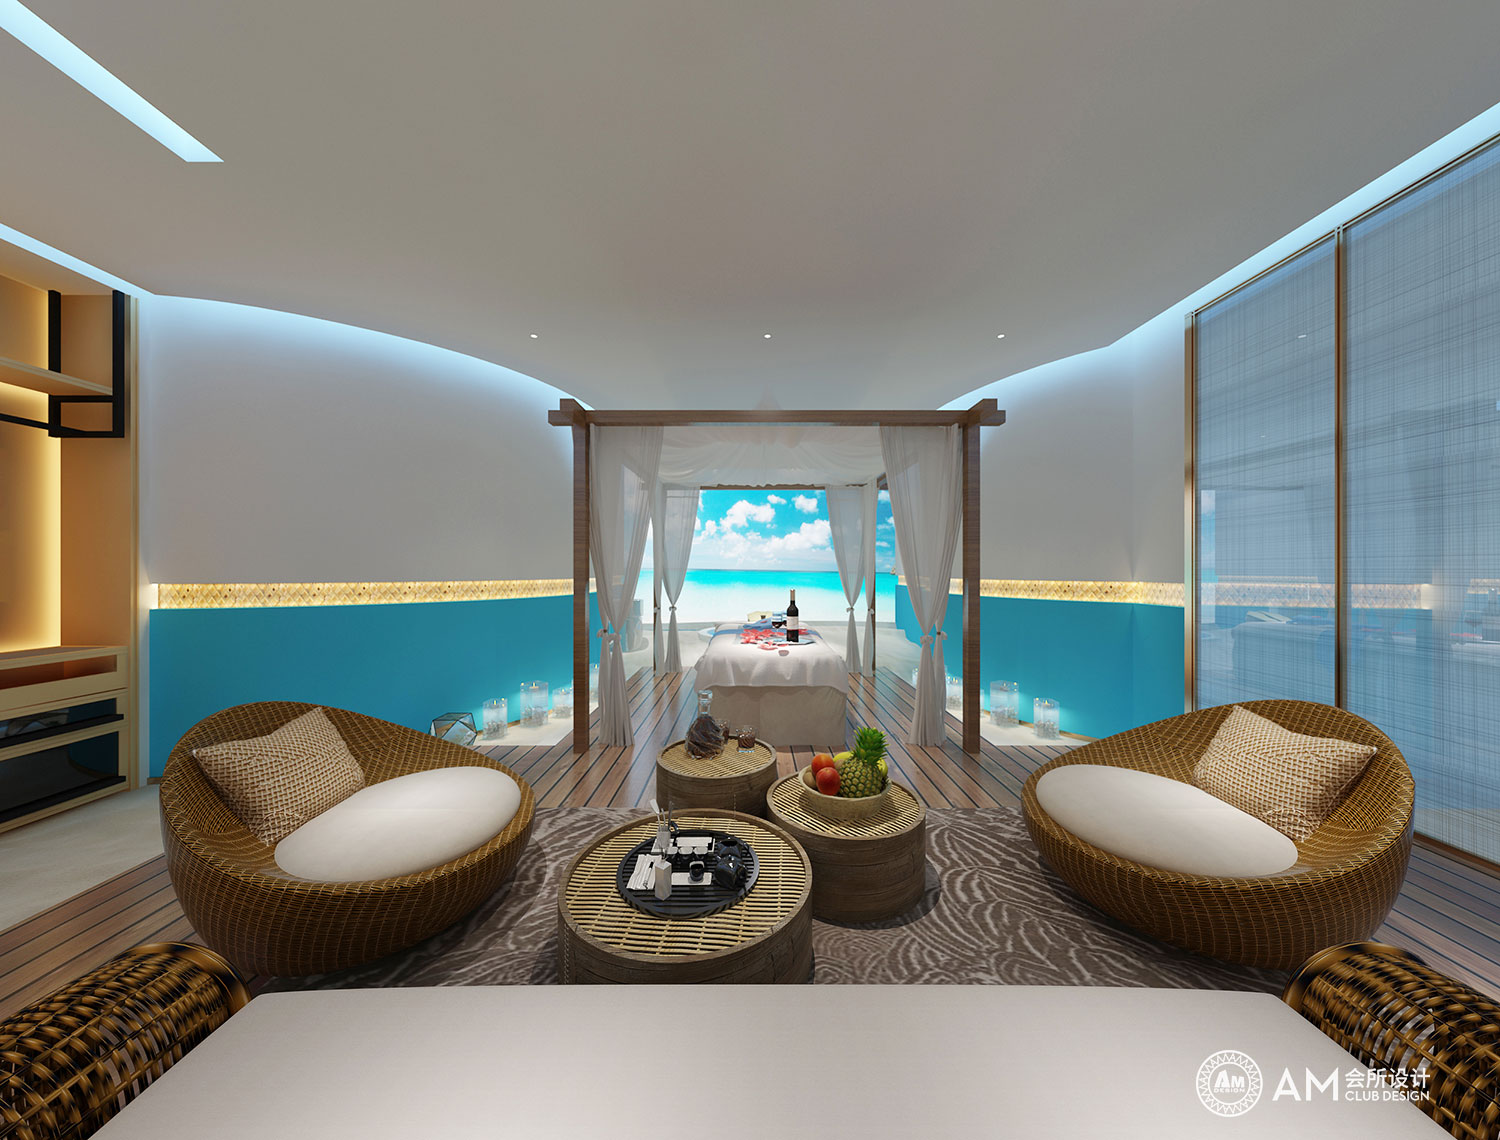 AM DESIGN | Spa room design of top spa spa in Sijihuacheng